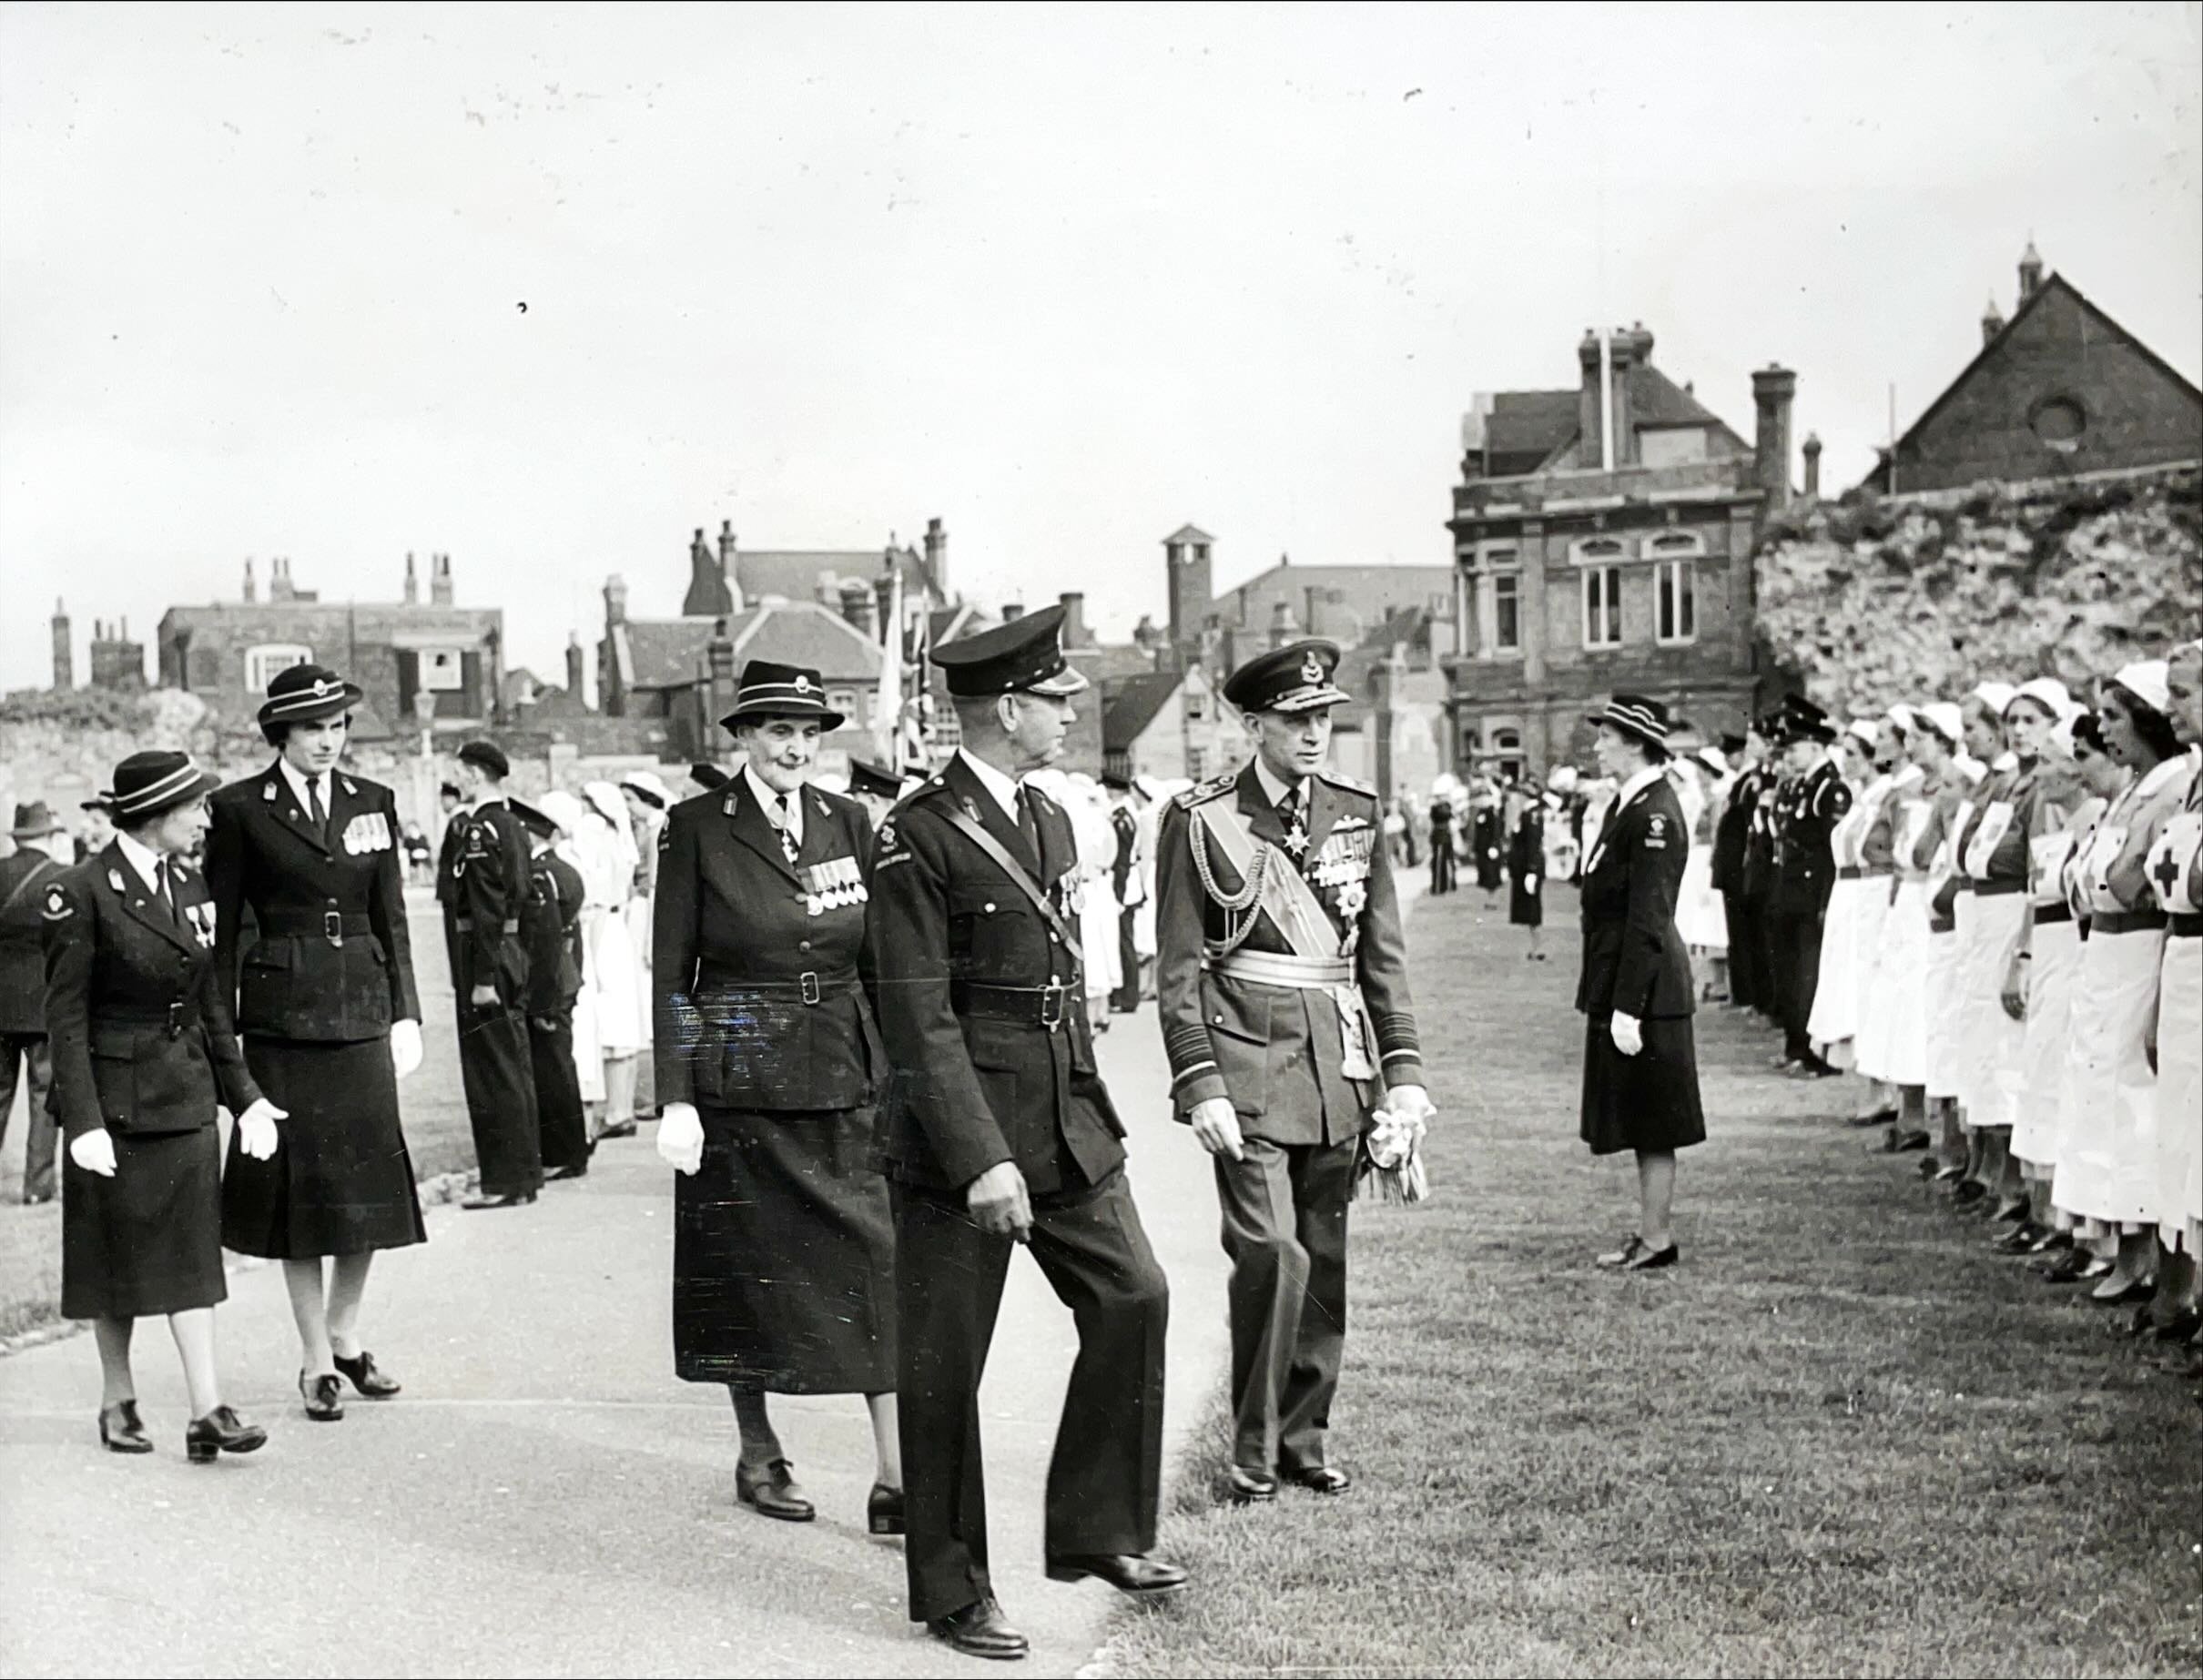 Medway Division of the British Red Cross Society being inspected by Air Chief Marshal Sir John Baker before Cathedral service, September 1956